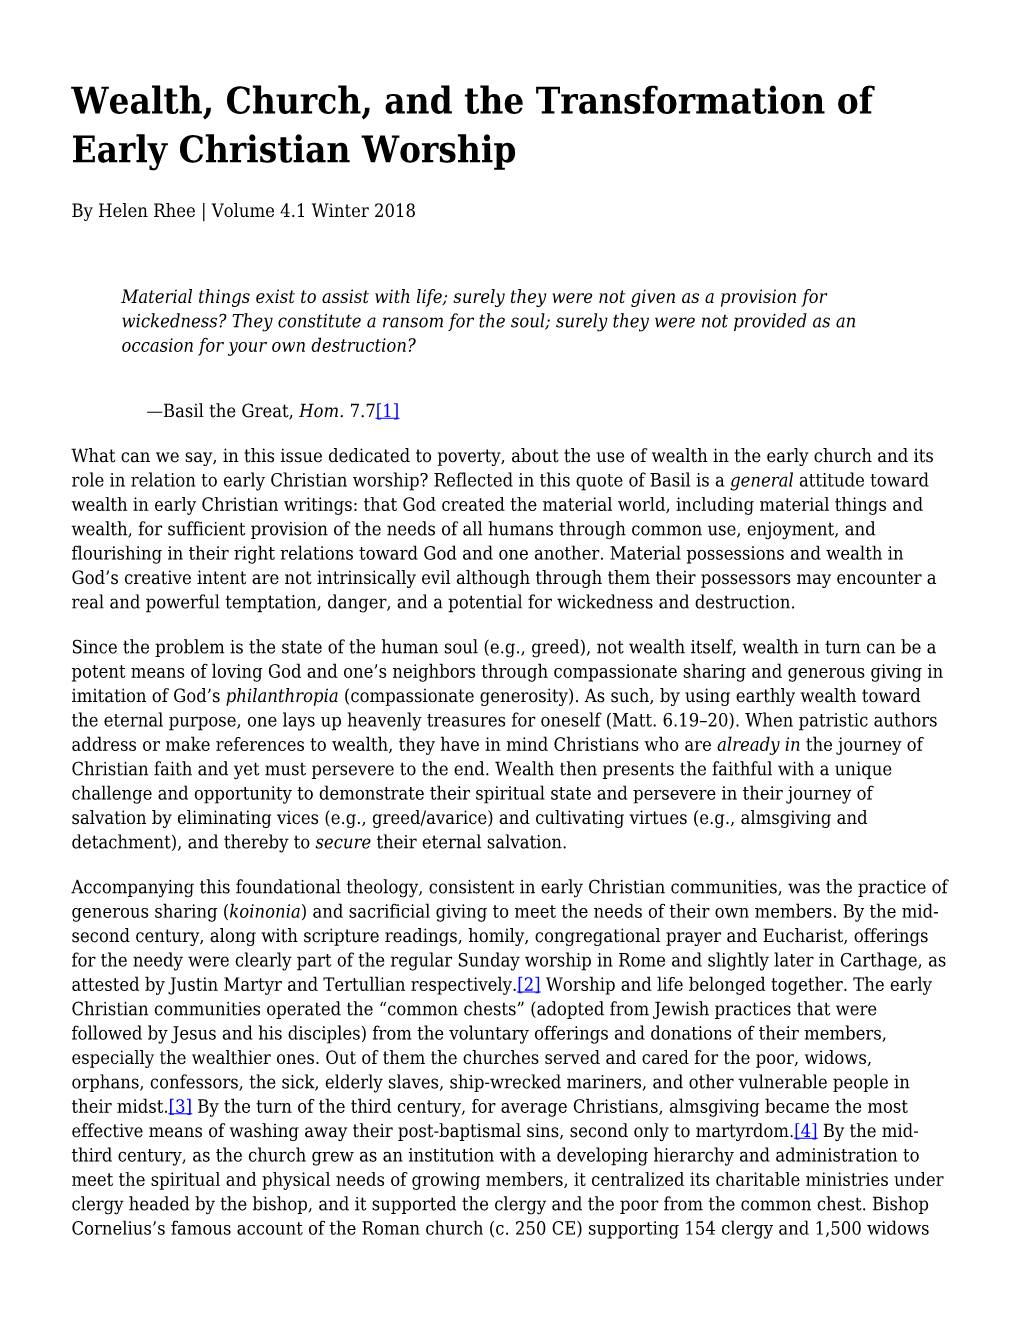 Wealth, Church, and the Transformation of Early Christian Worship